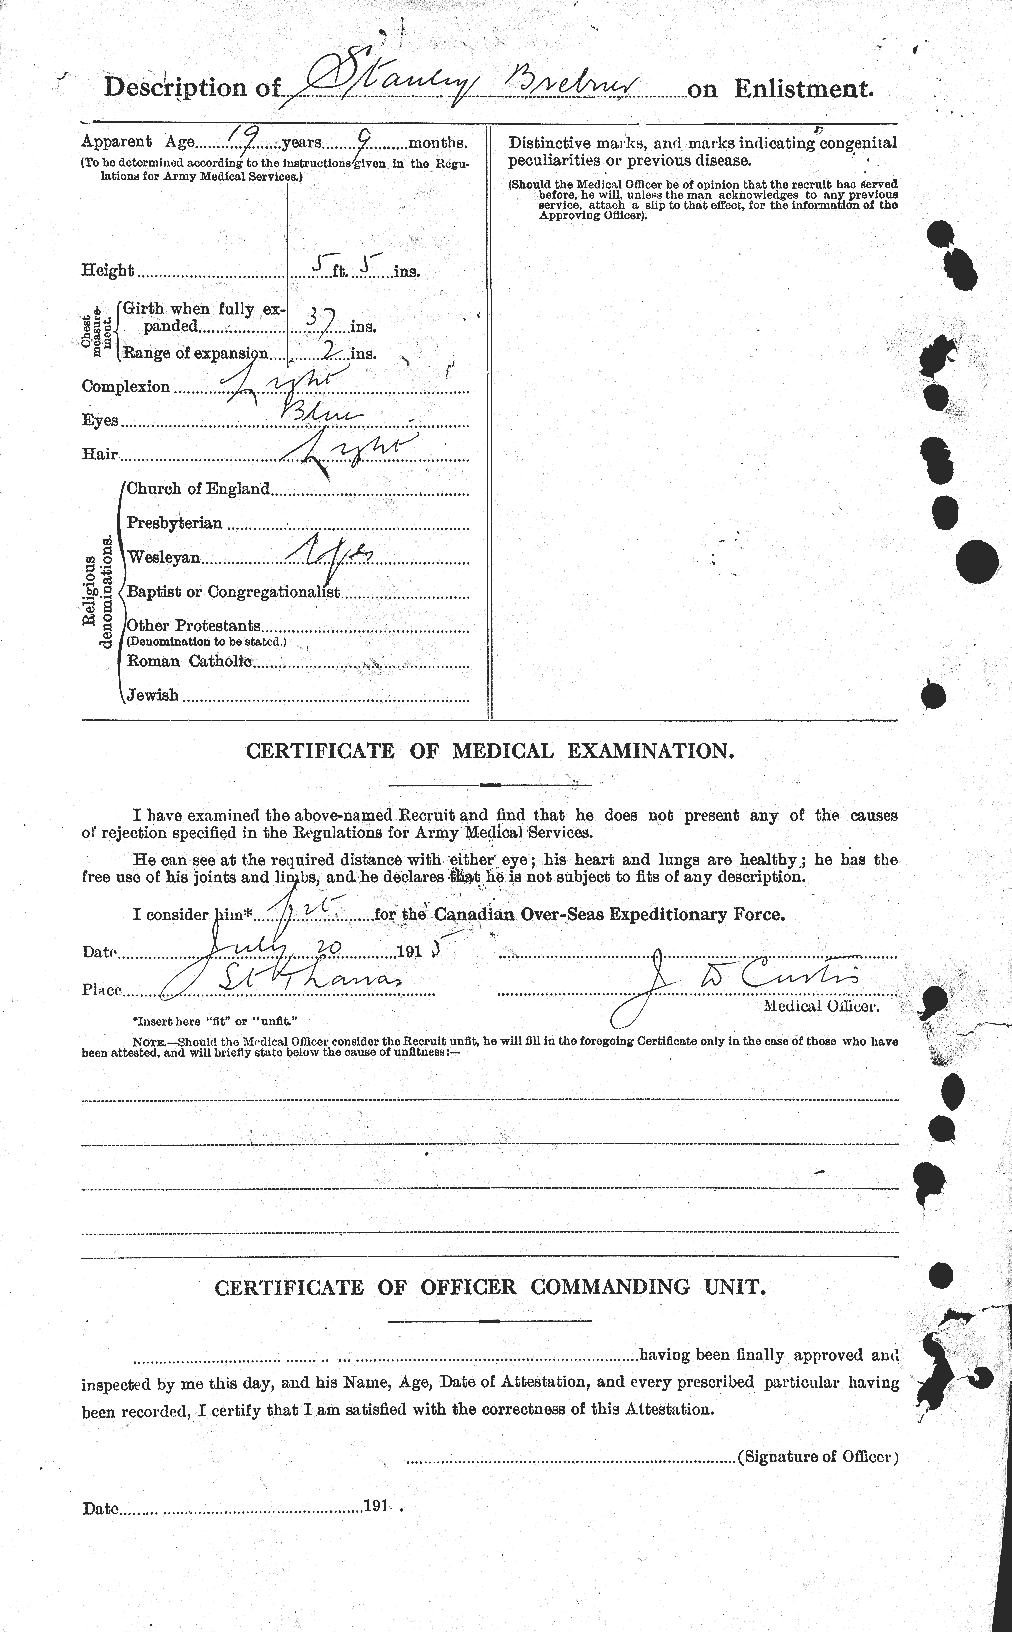 Personnel Records of the First World War - CEF 262852b